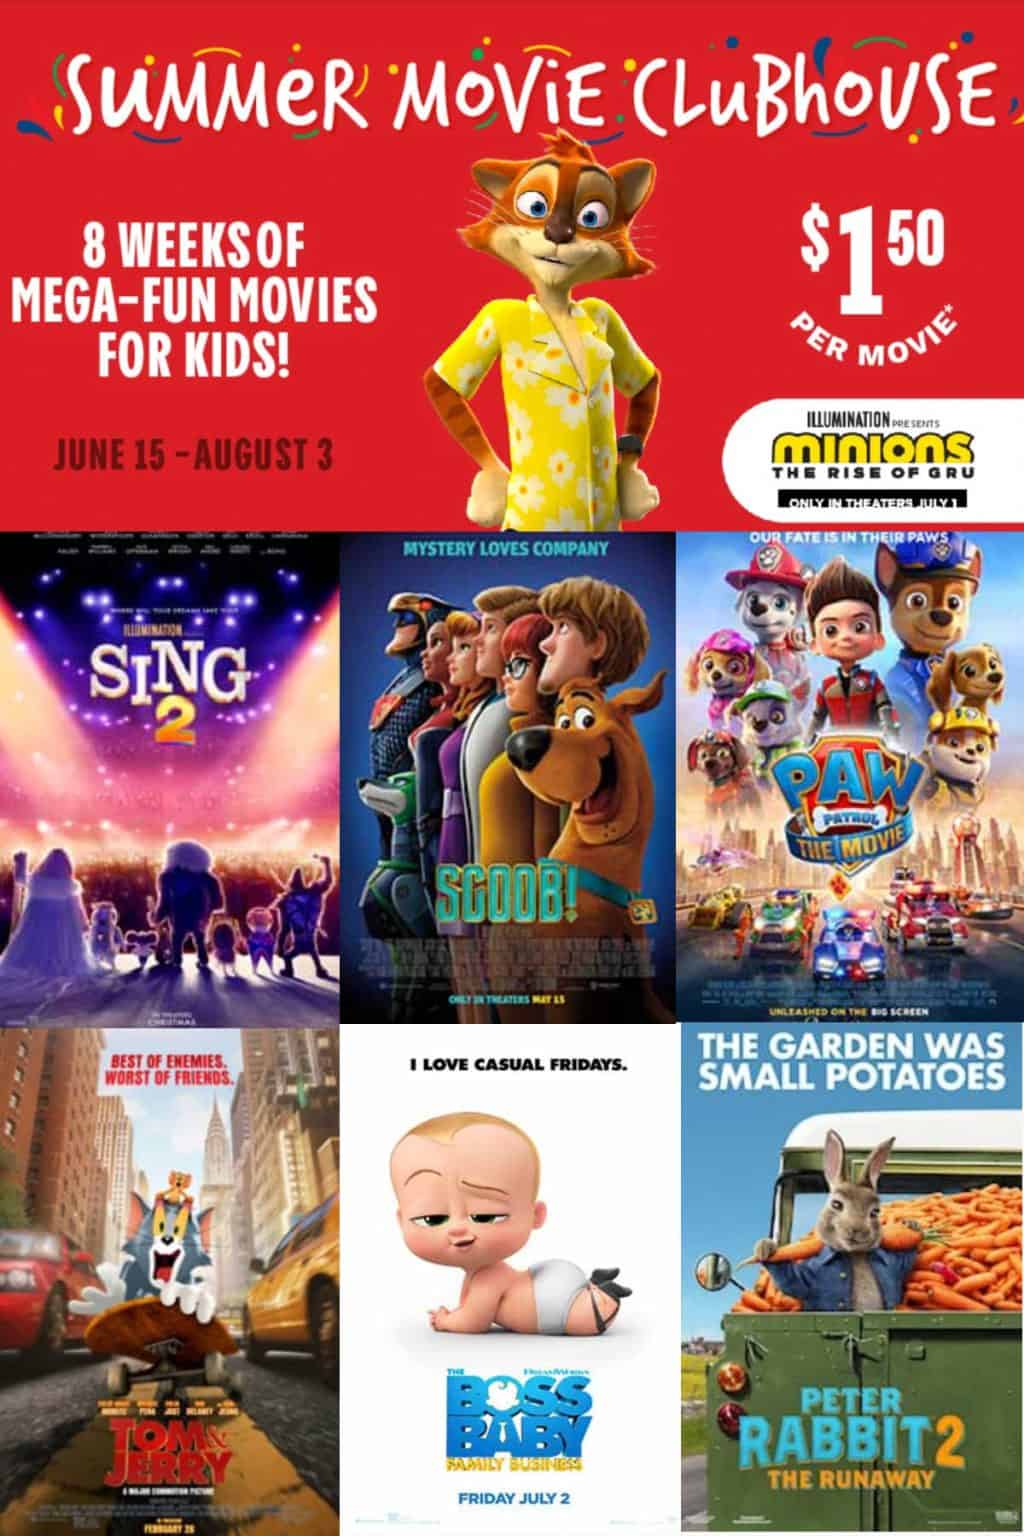 2022 Cinemark Summer Movie Clubhouse ONLY 1.50 Per Person!! • MidgetMomma